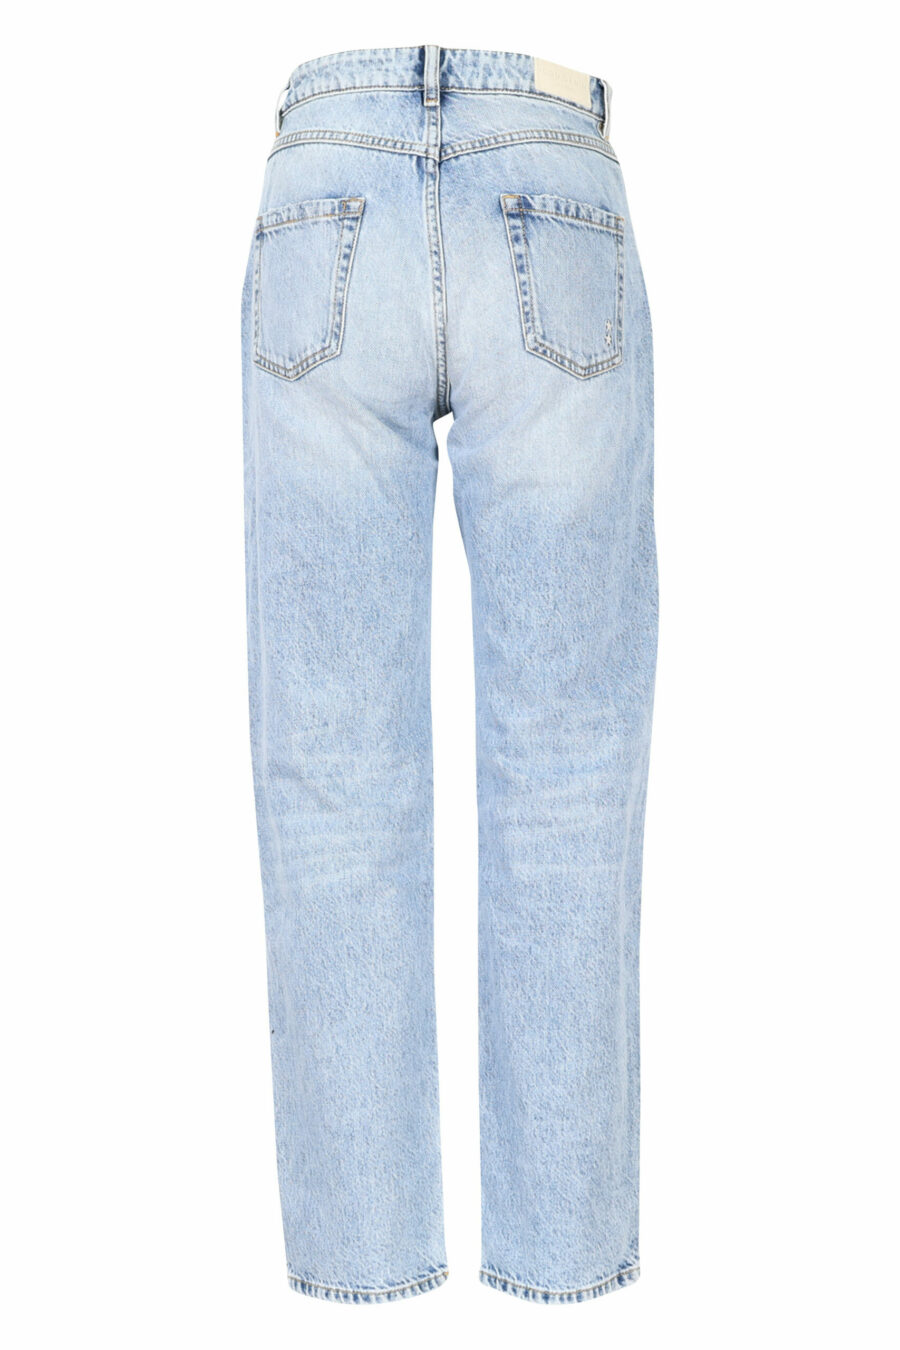 Blue denim trousers "bella" with minirotos - 8052691165867 2 scaled